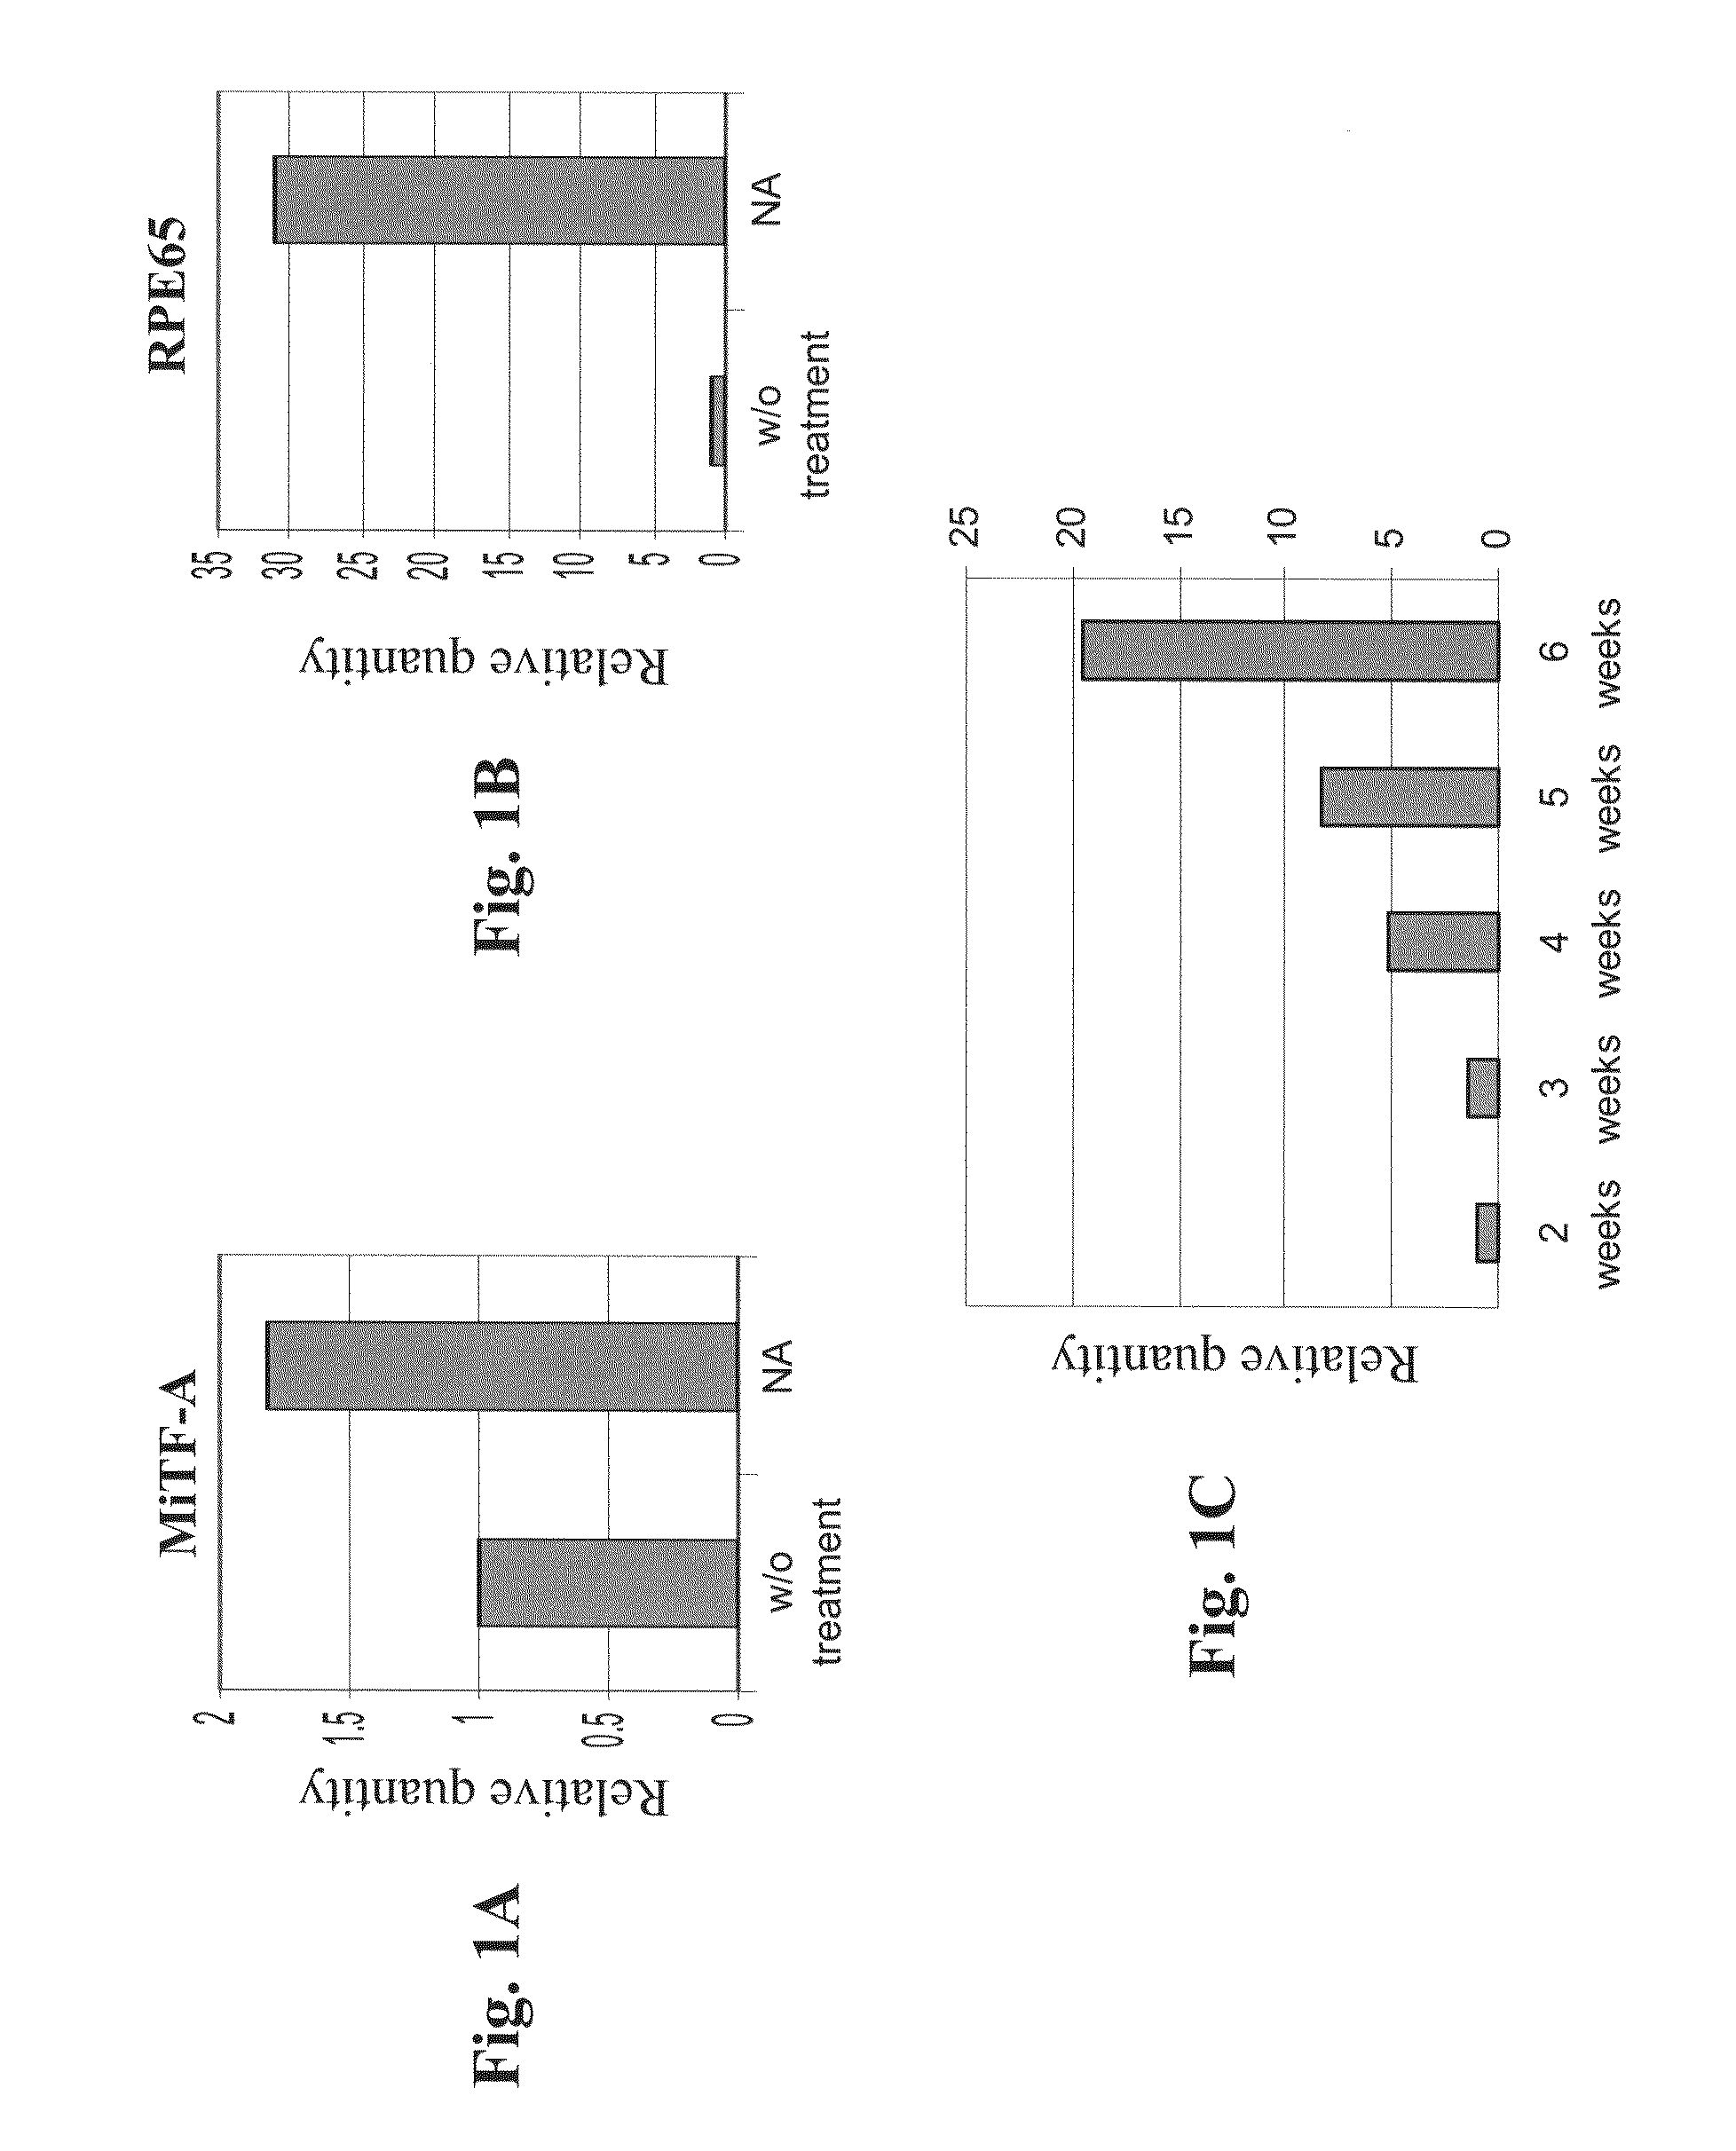 Retinal pigment epithelial cells differentiated from embryonic stem cells with nicotinamide and activin A